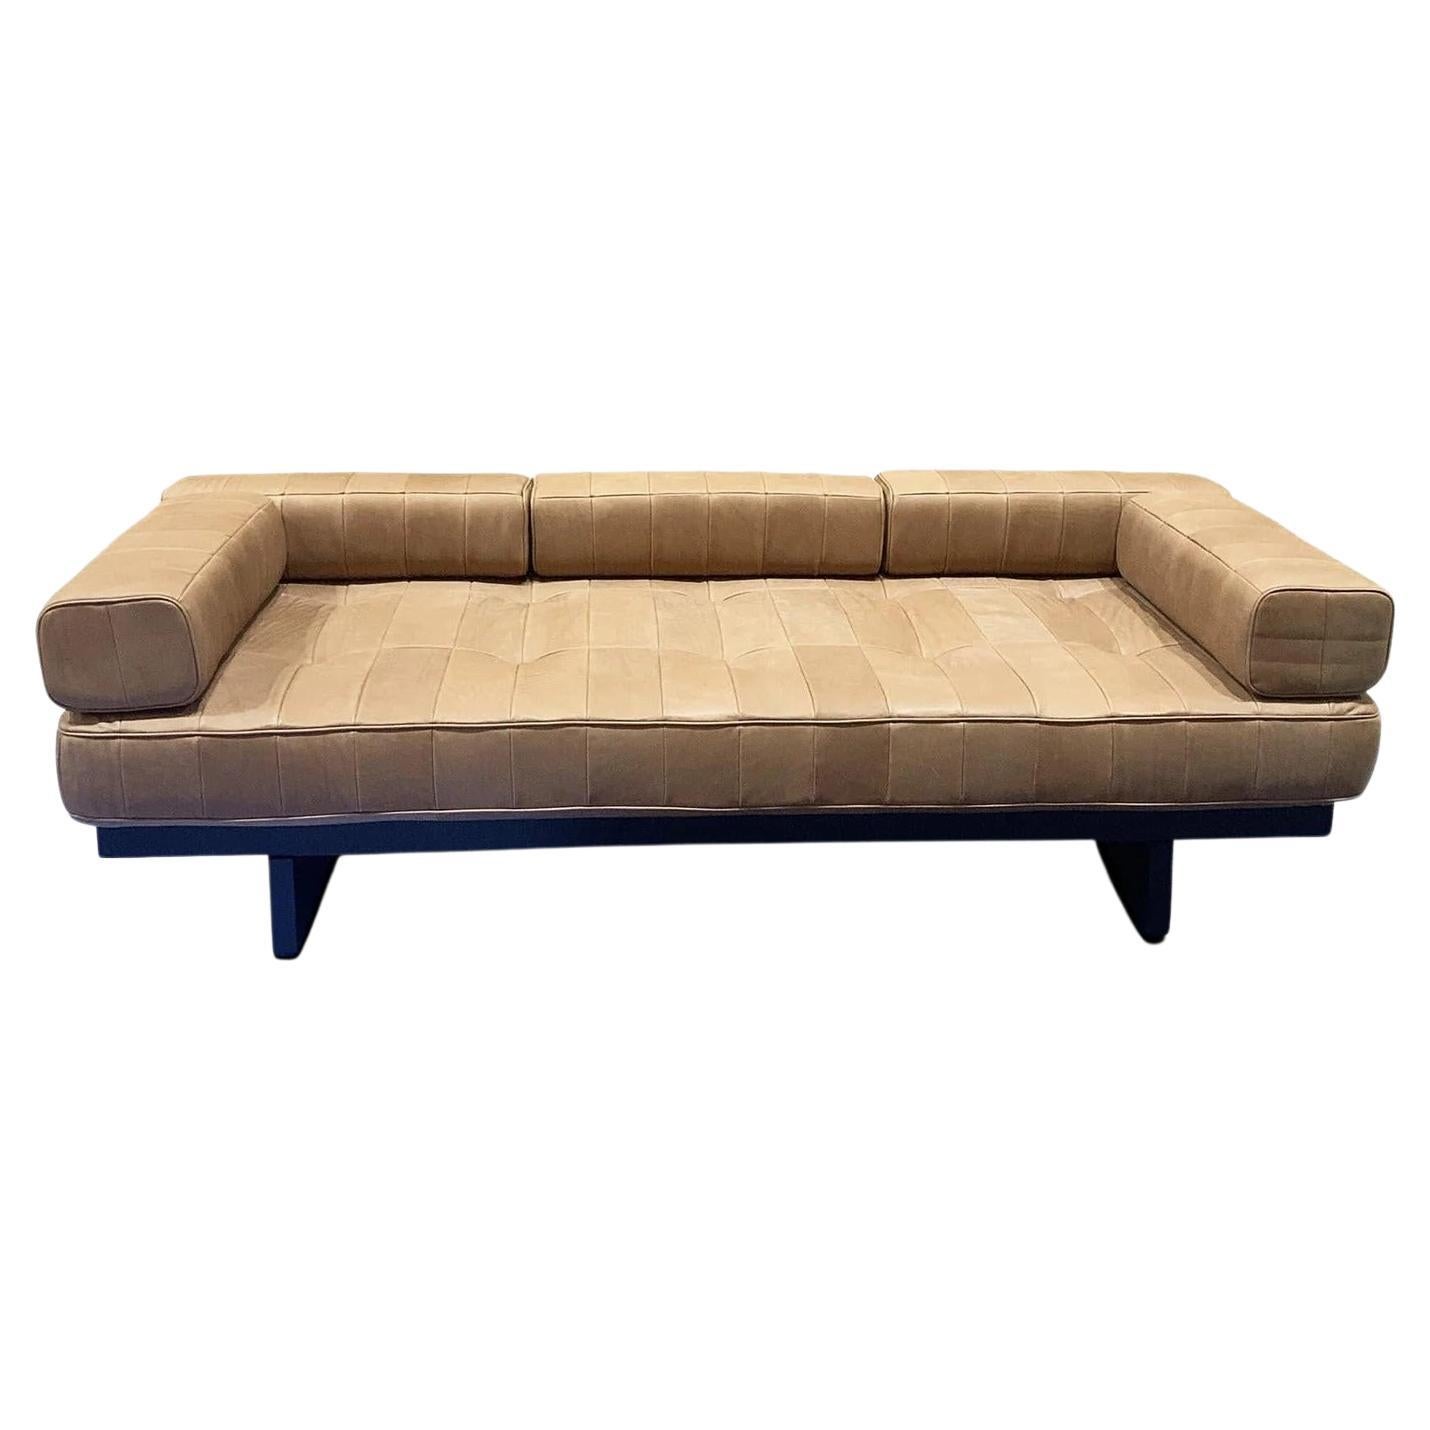 DS 80/03 Sofa with 5 Cushions For Sale